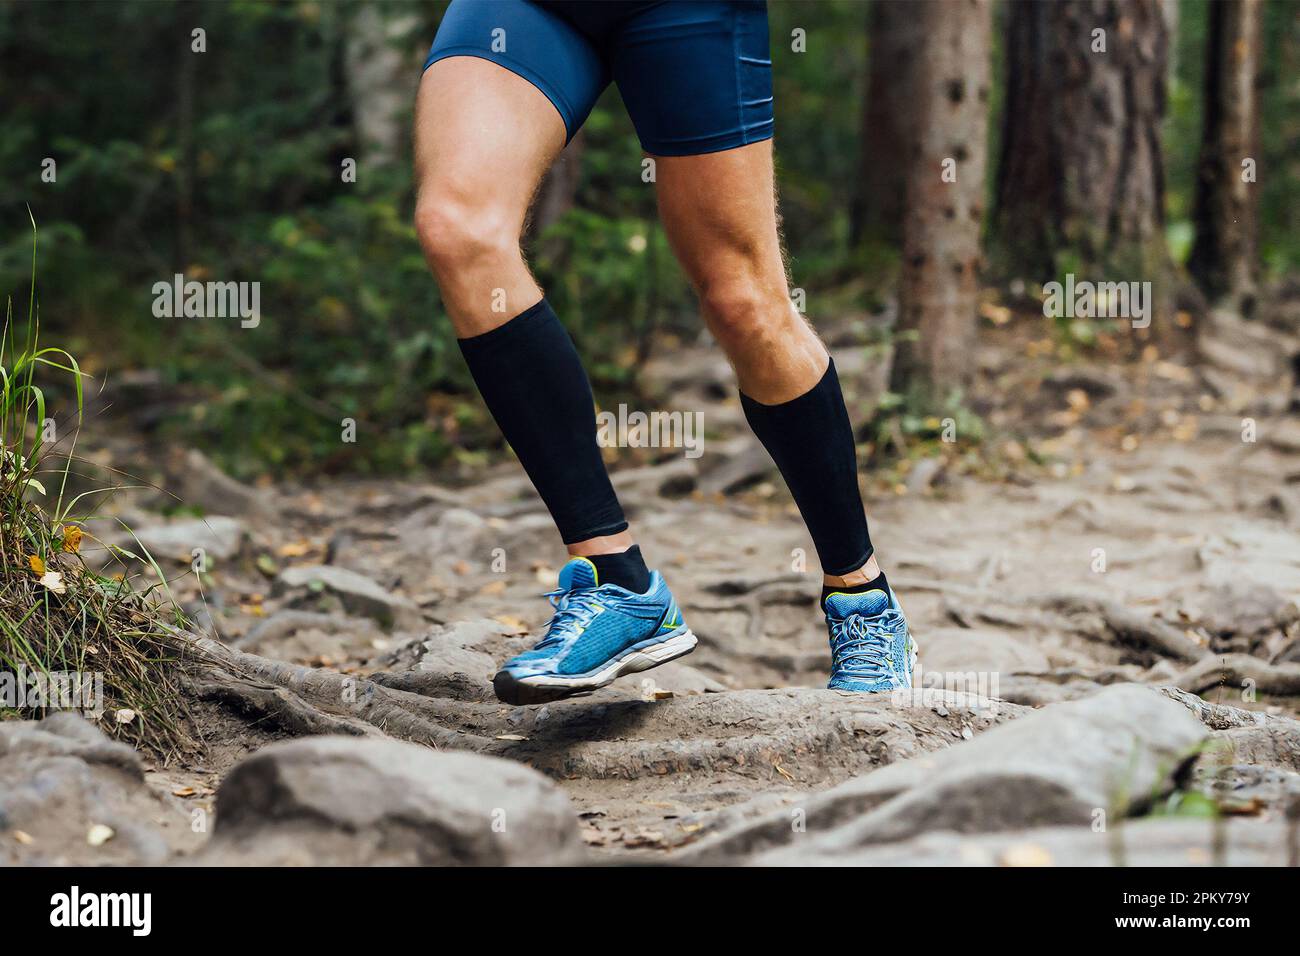 legs runner in compression sleeves on his feet run forest trail race over stones, summer marathon race Stock Photo